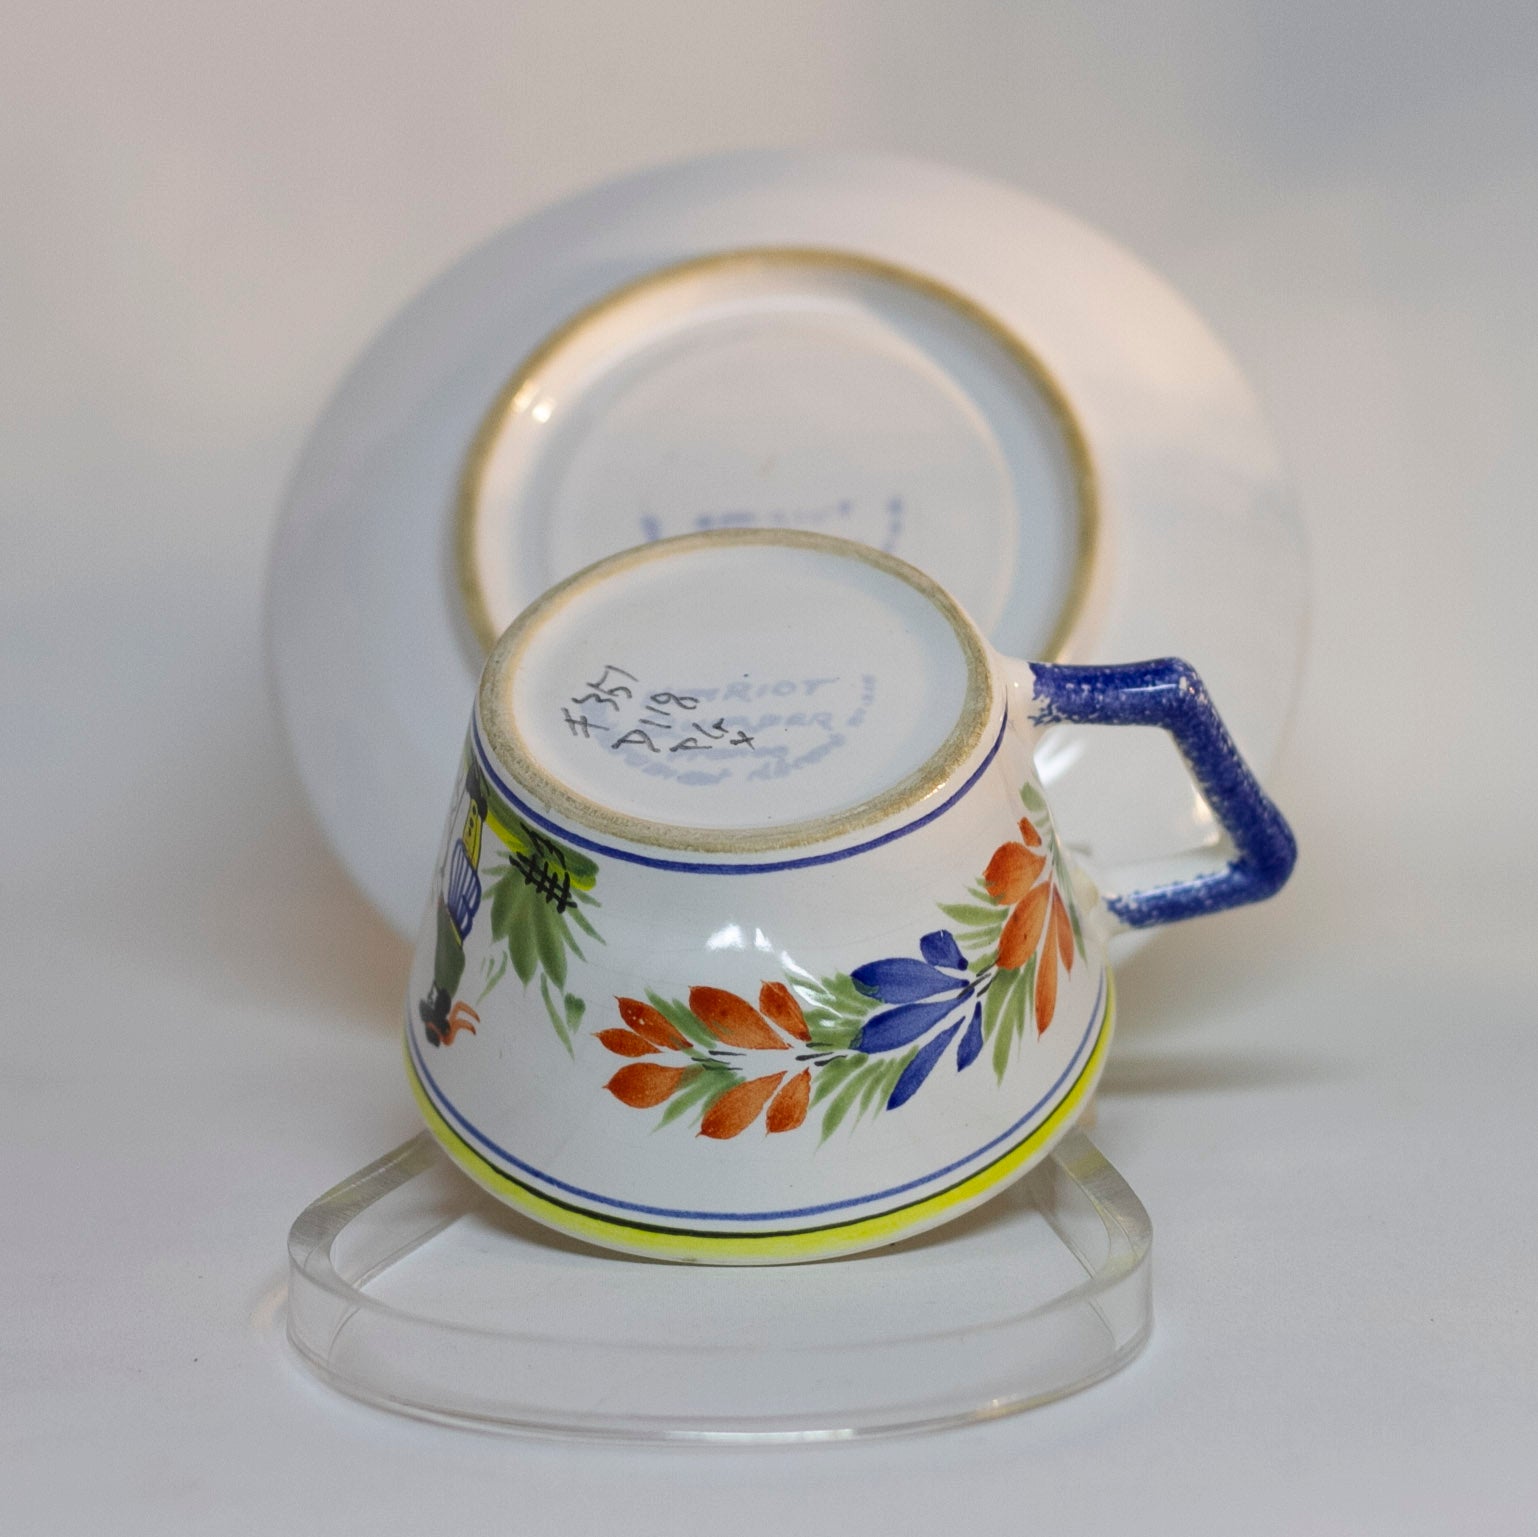 Vintage Hand Painted French Faïence Quimper by HENRIOT White Glaze with Peasant Man FLAT CUP & SAUCER Circa 1968 - 1983